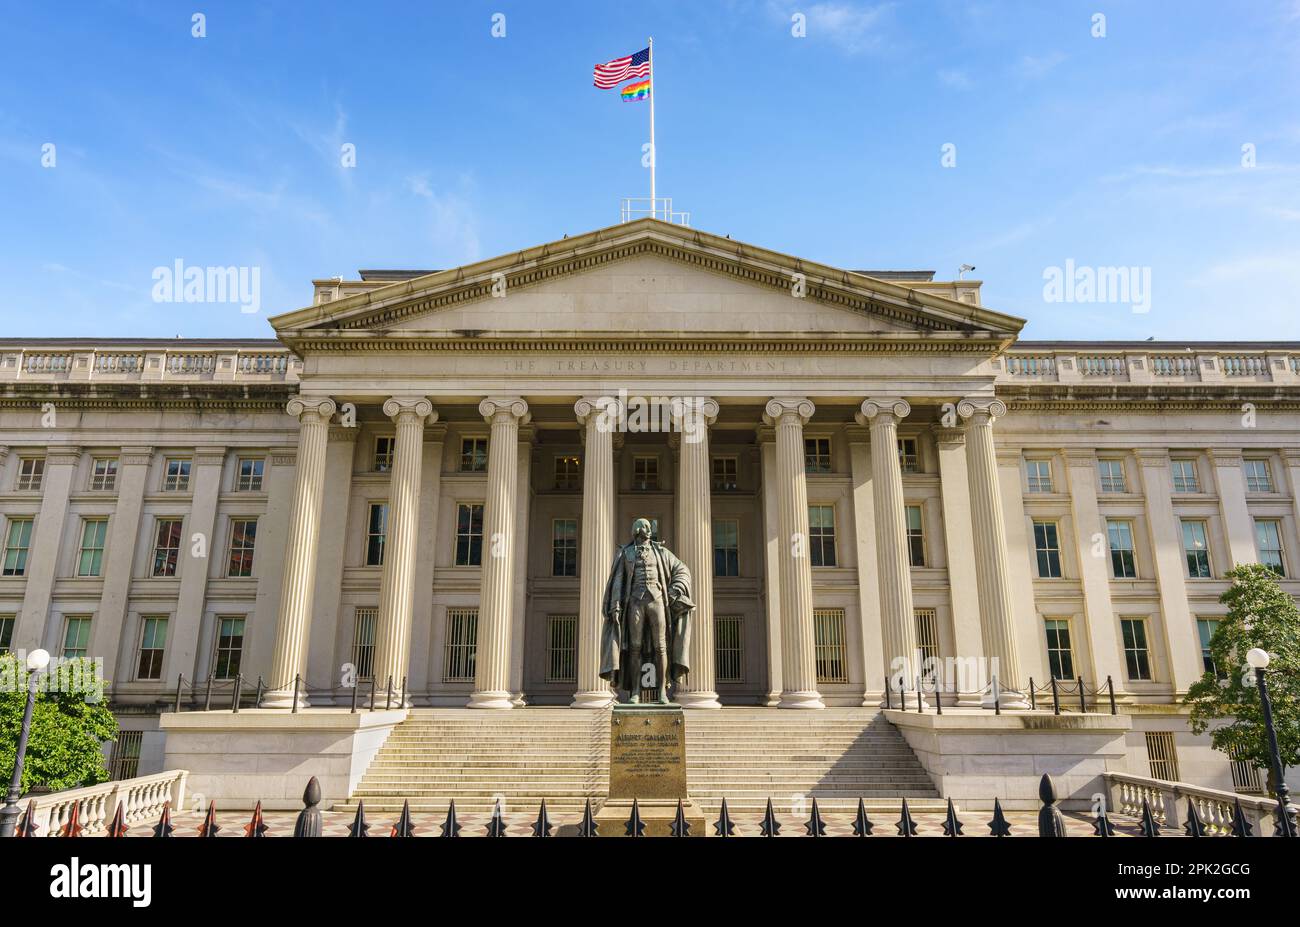 Treasury Building in Washington, D.C., USA. United States Department of the Treasury. North entrance with the statue of Albert Gallatin. Stock Photo